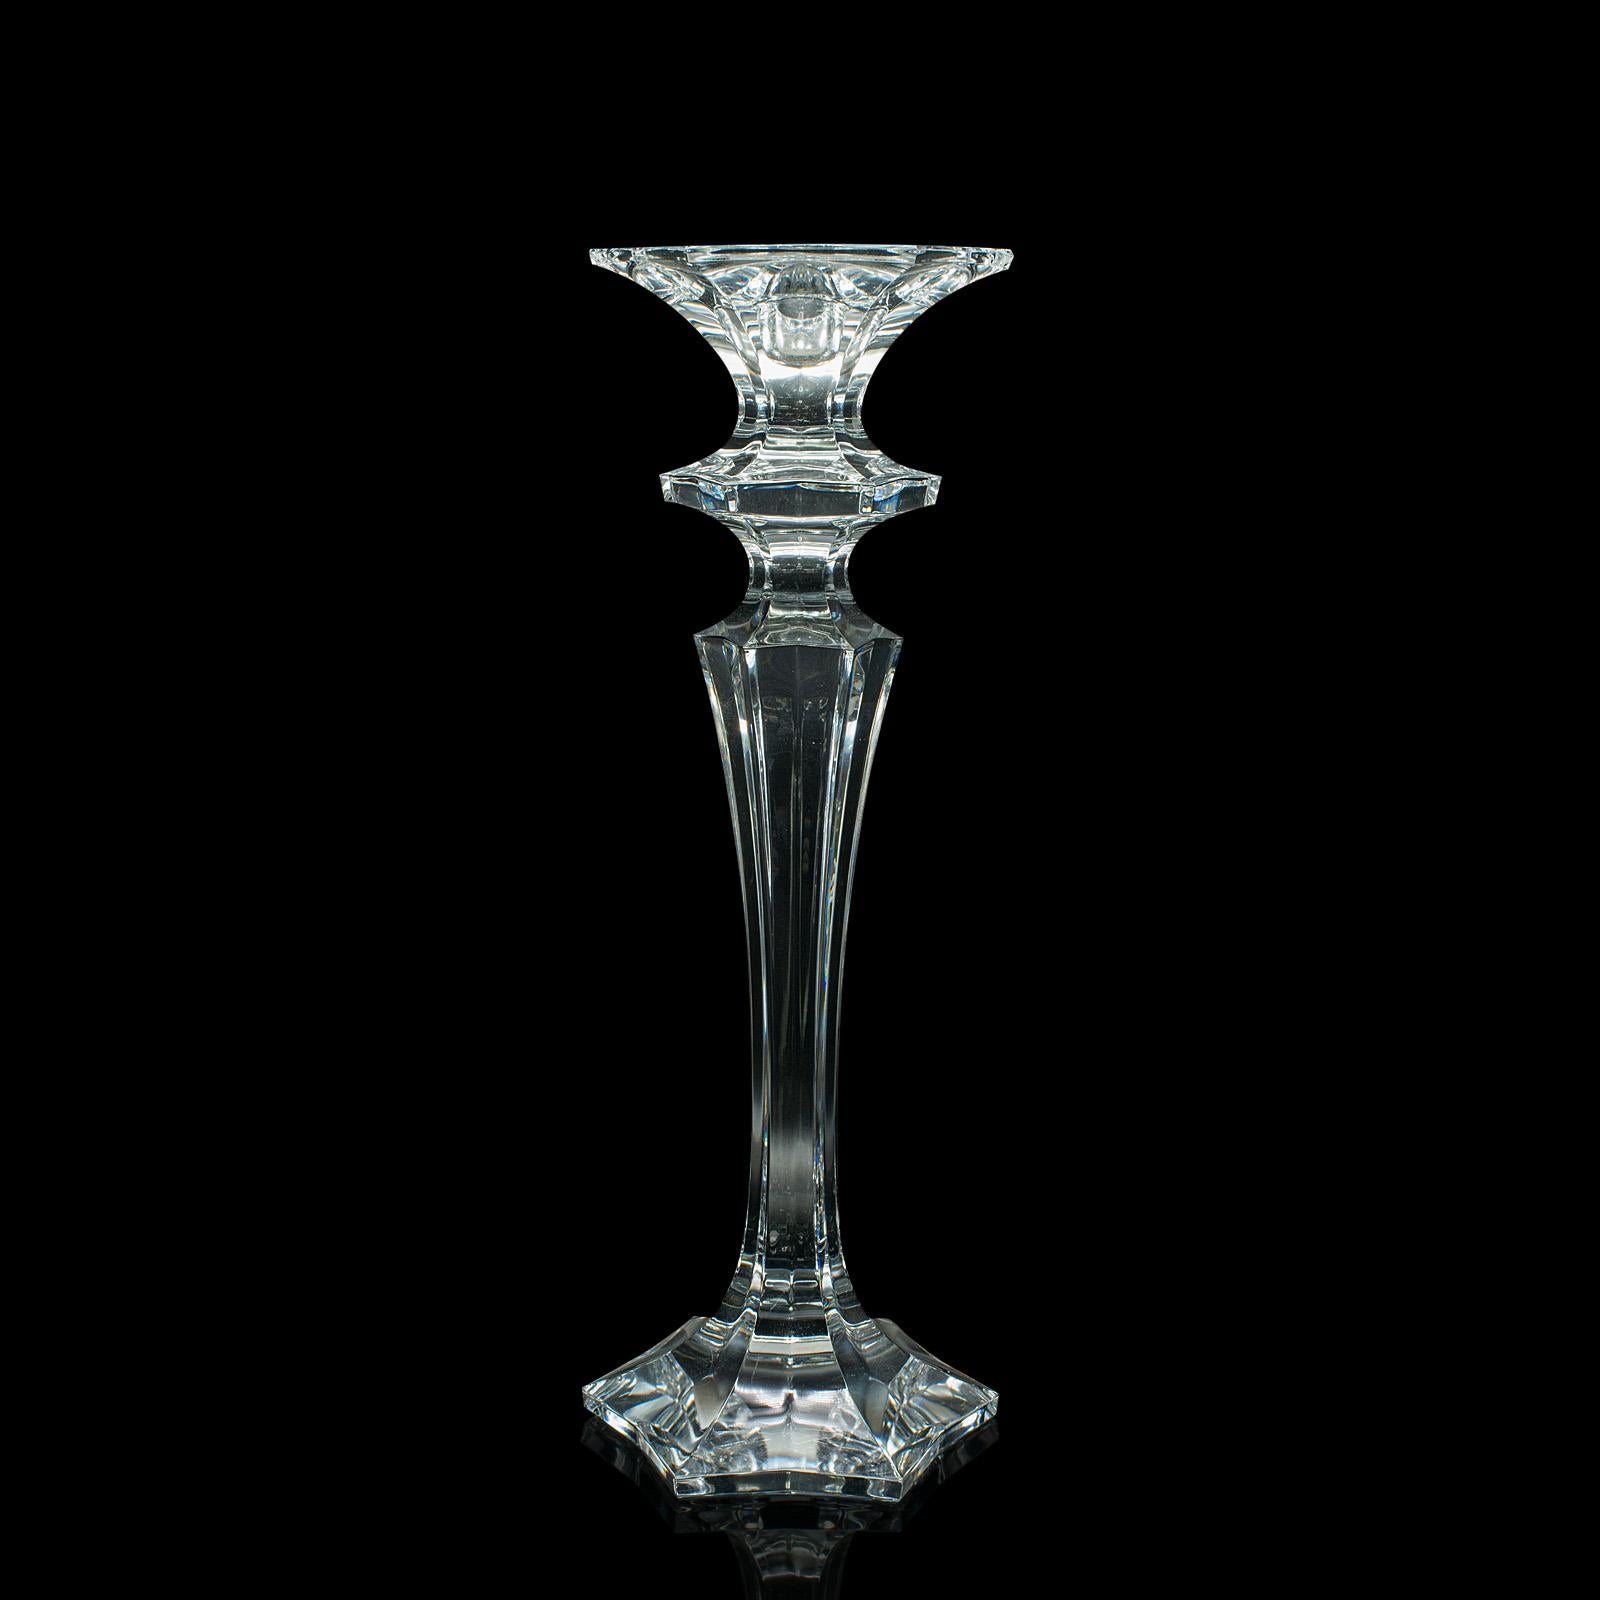 This is a pair of vintage candlesticks. An English, glass decorative candle nozzle, dating to the late 20th century, circa 1970.

Add a delightful decorative touch to your centrepiece
Displaying a desirable aged patina throughout
Quality glass